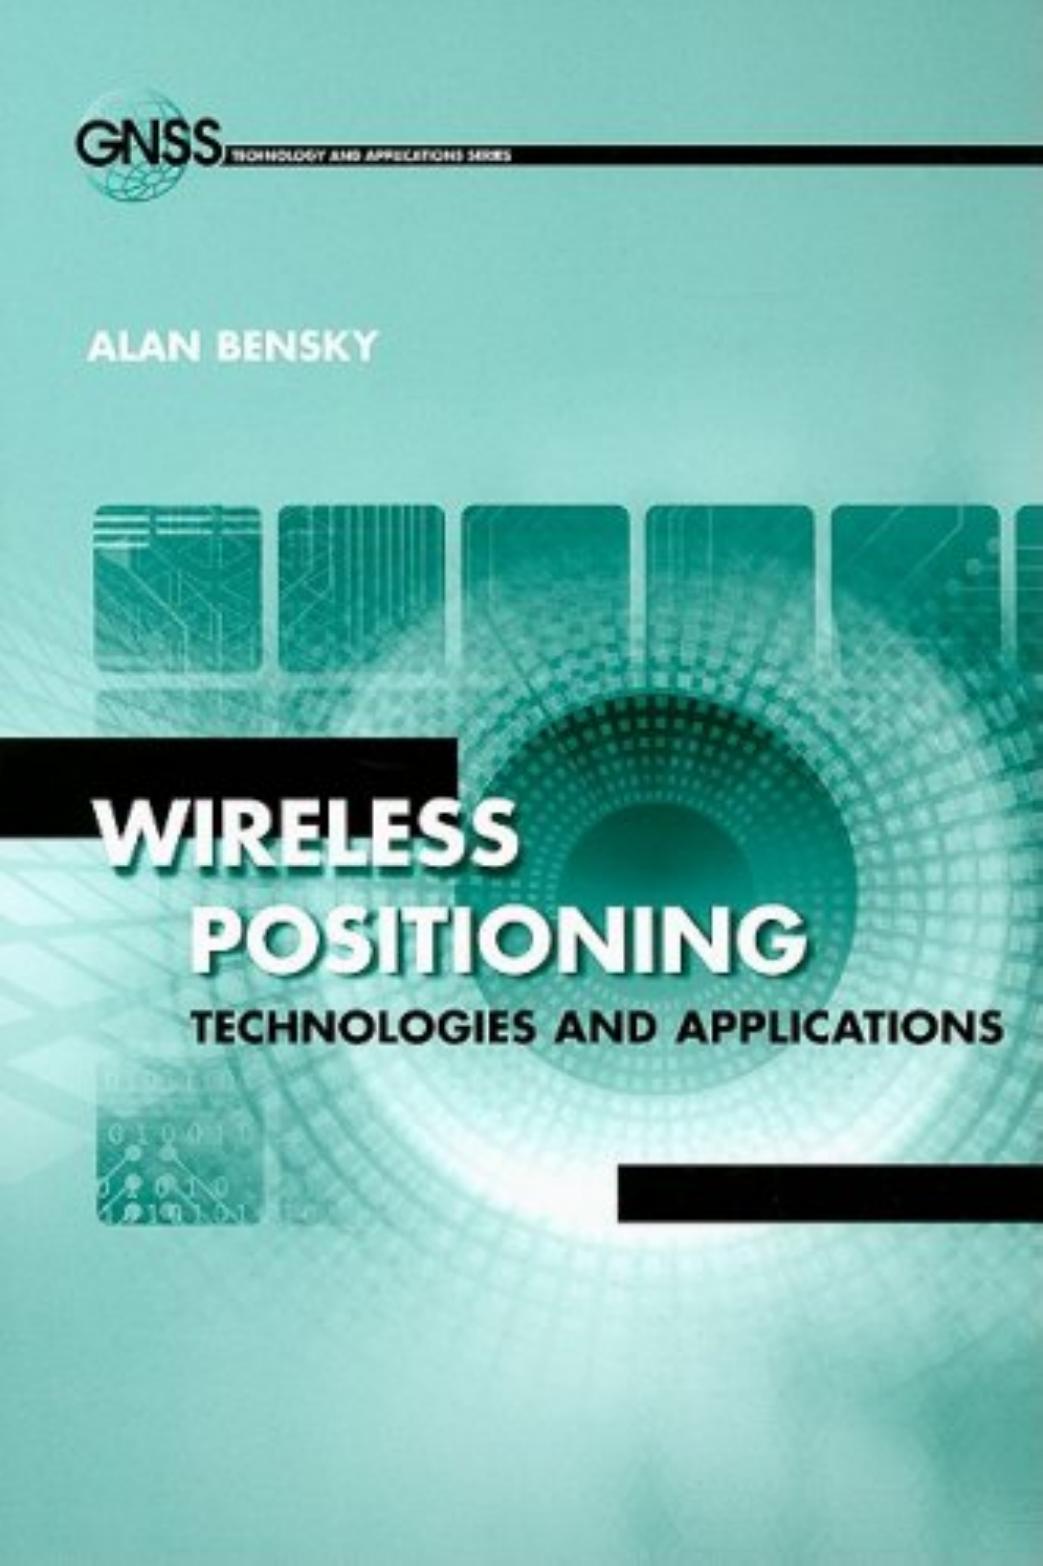 Wireless Positioning Technologies and Applications by Alan Bensky